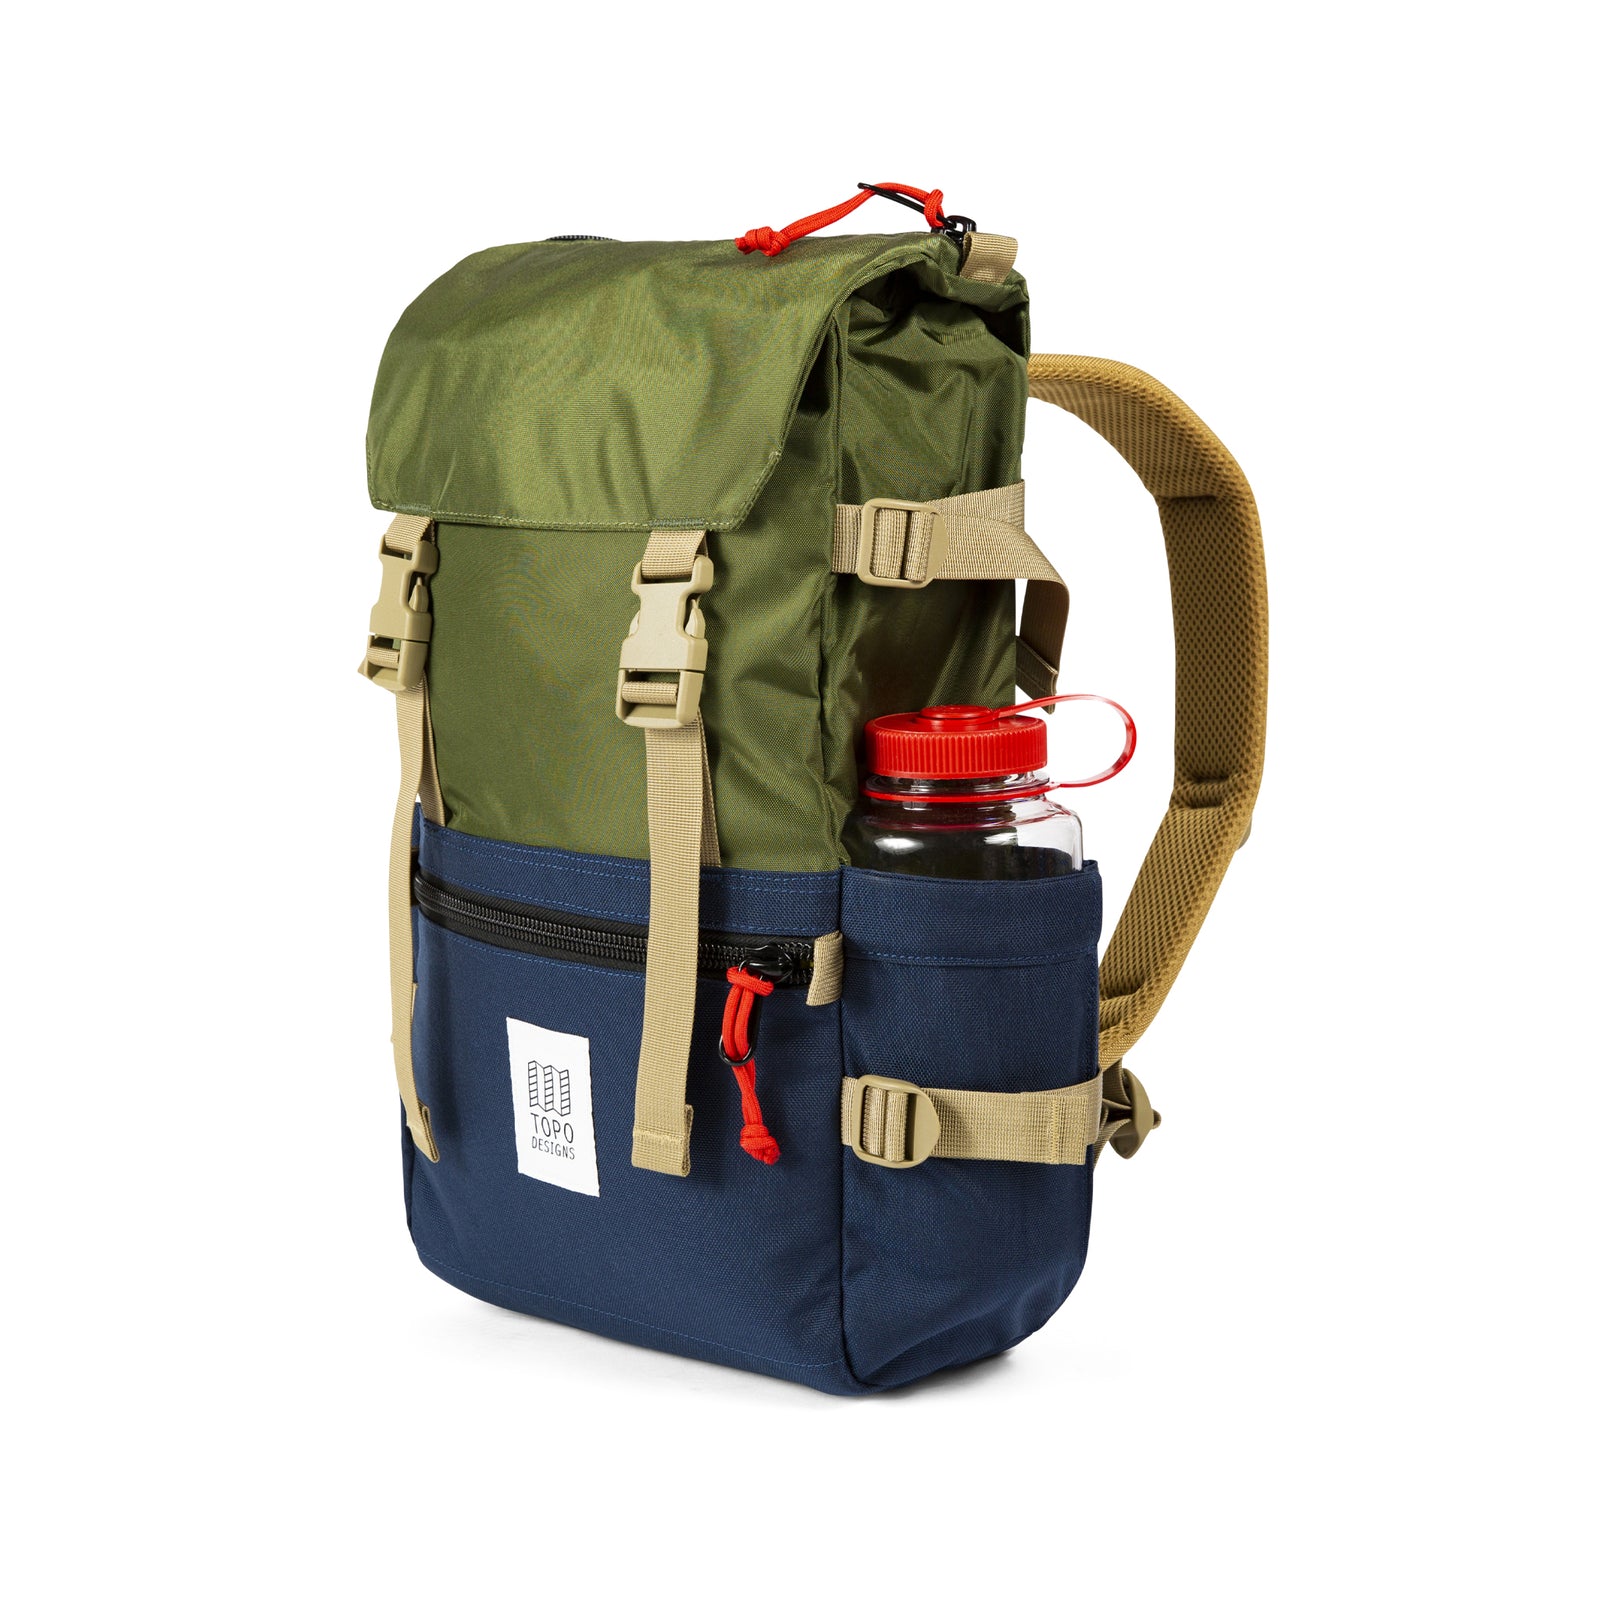 General 3/4 front detail shot of the Topo Designs Rover Pack Classic in Olive/Navy showing Nalgene water bottle in expandable side pocket.